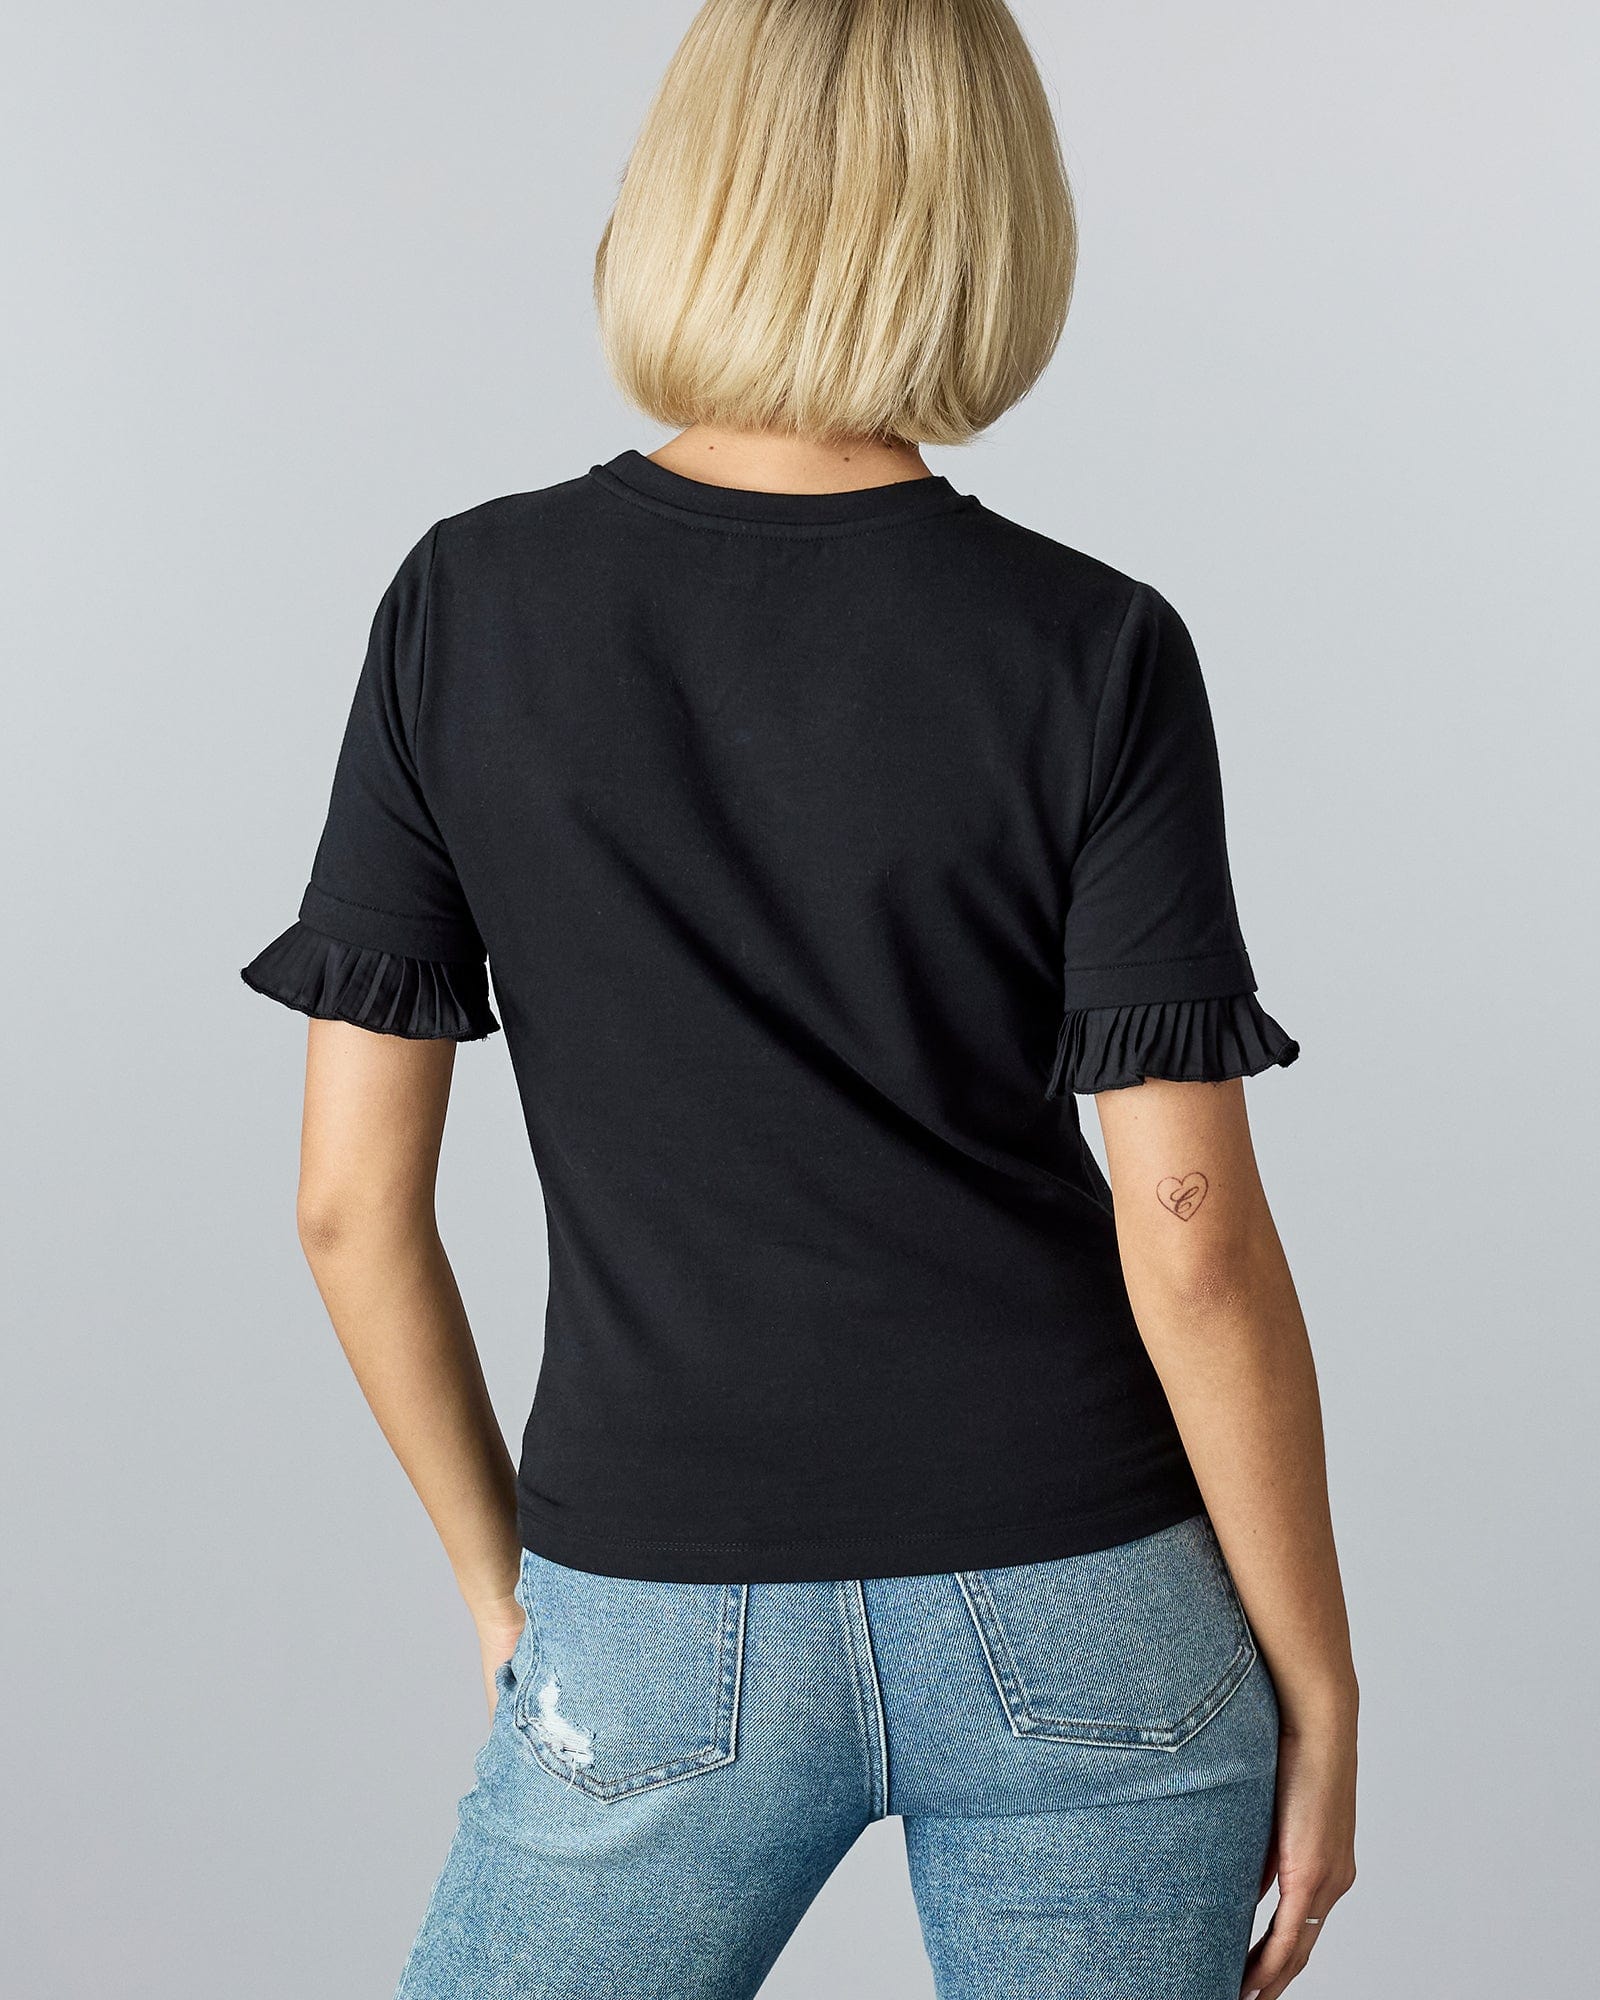 Woman in a black short sleeved top with ruffles on bottom of sleeve hem.